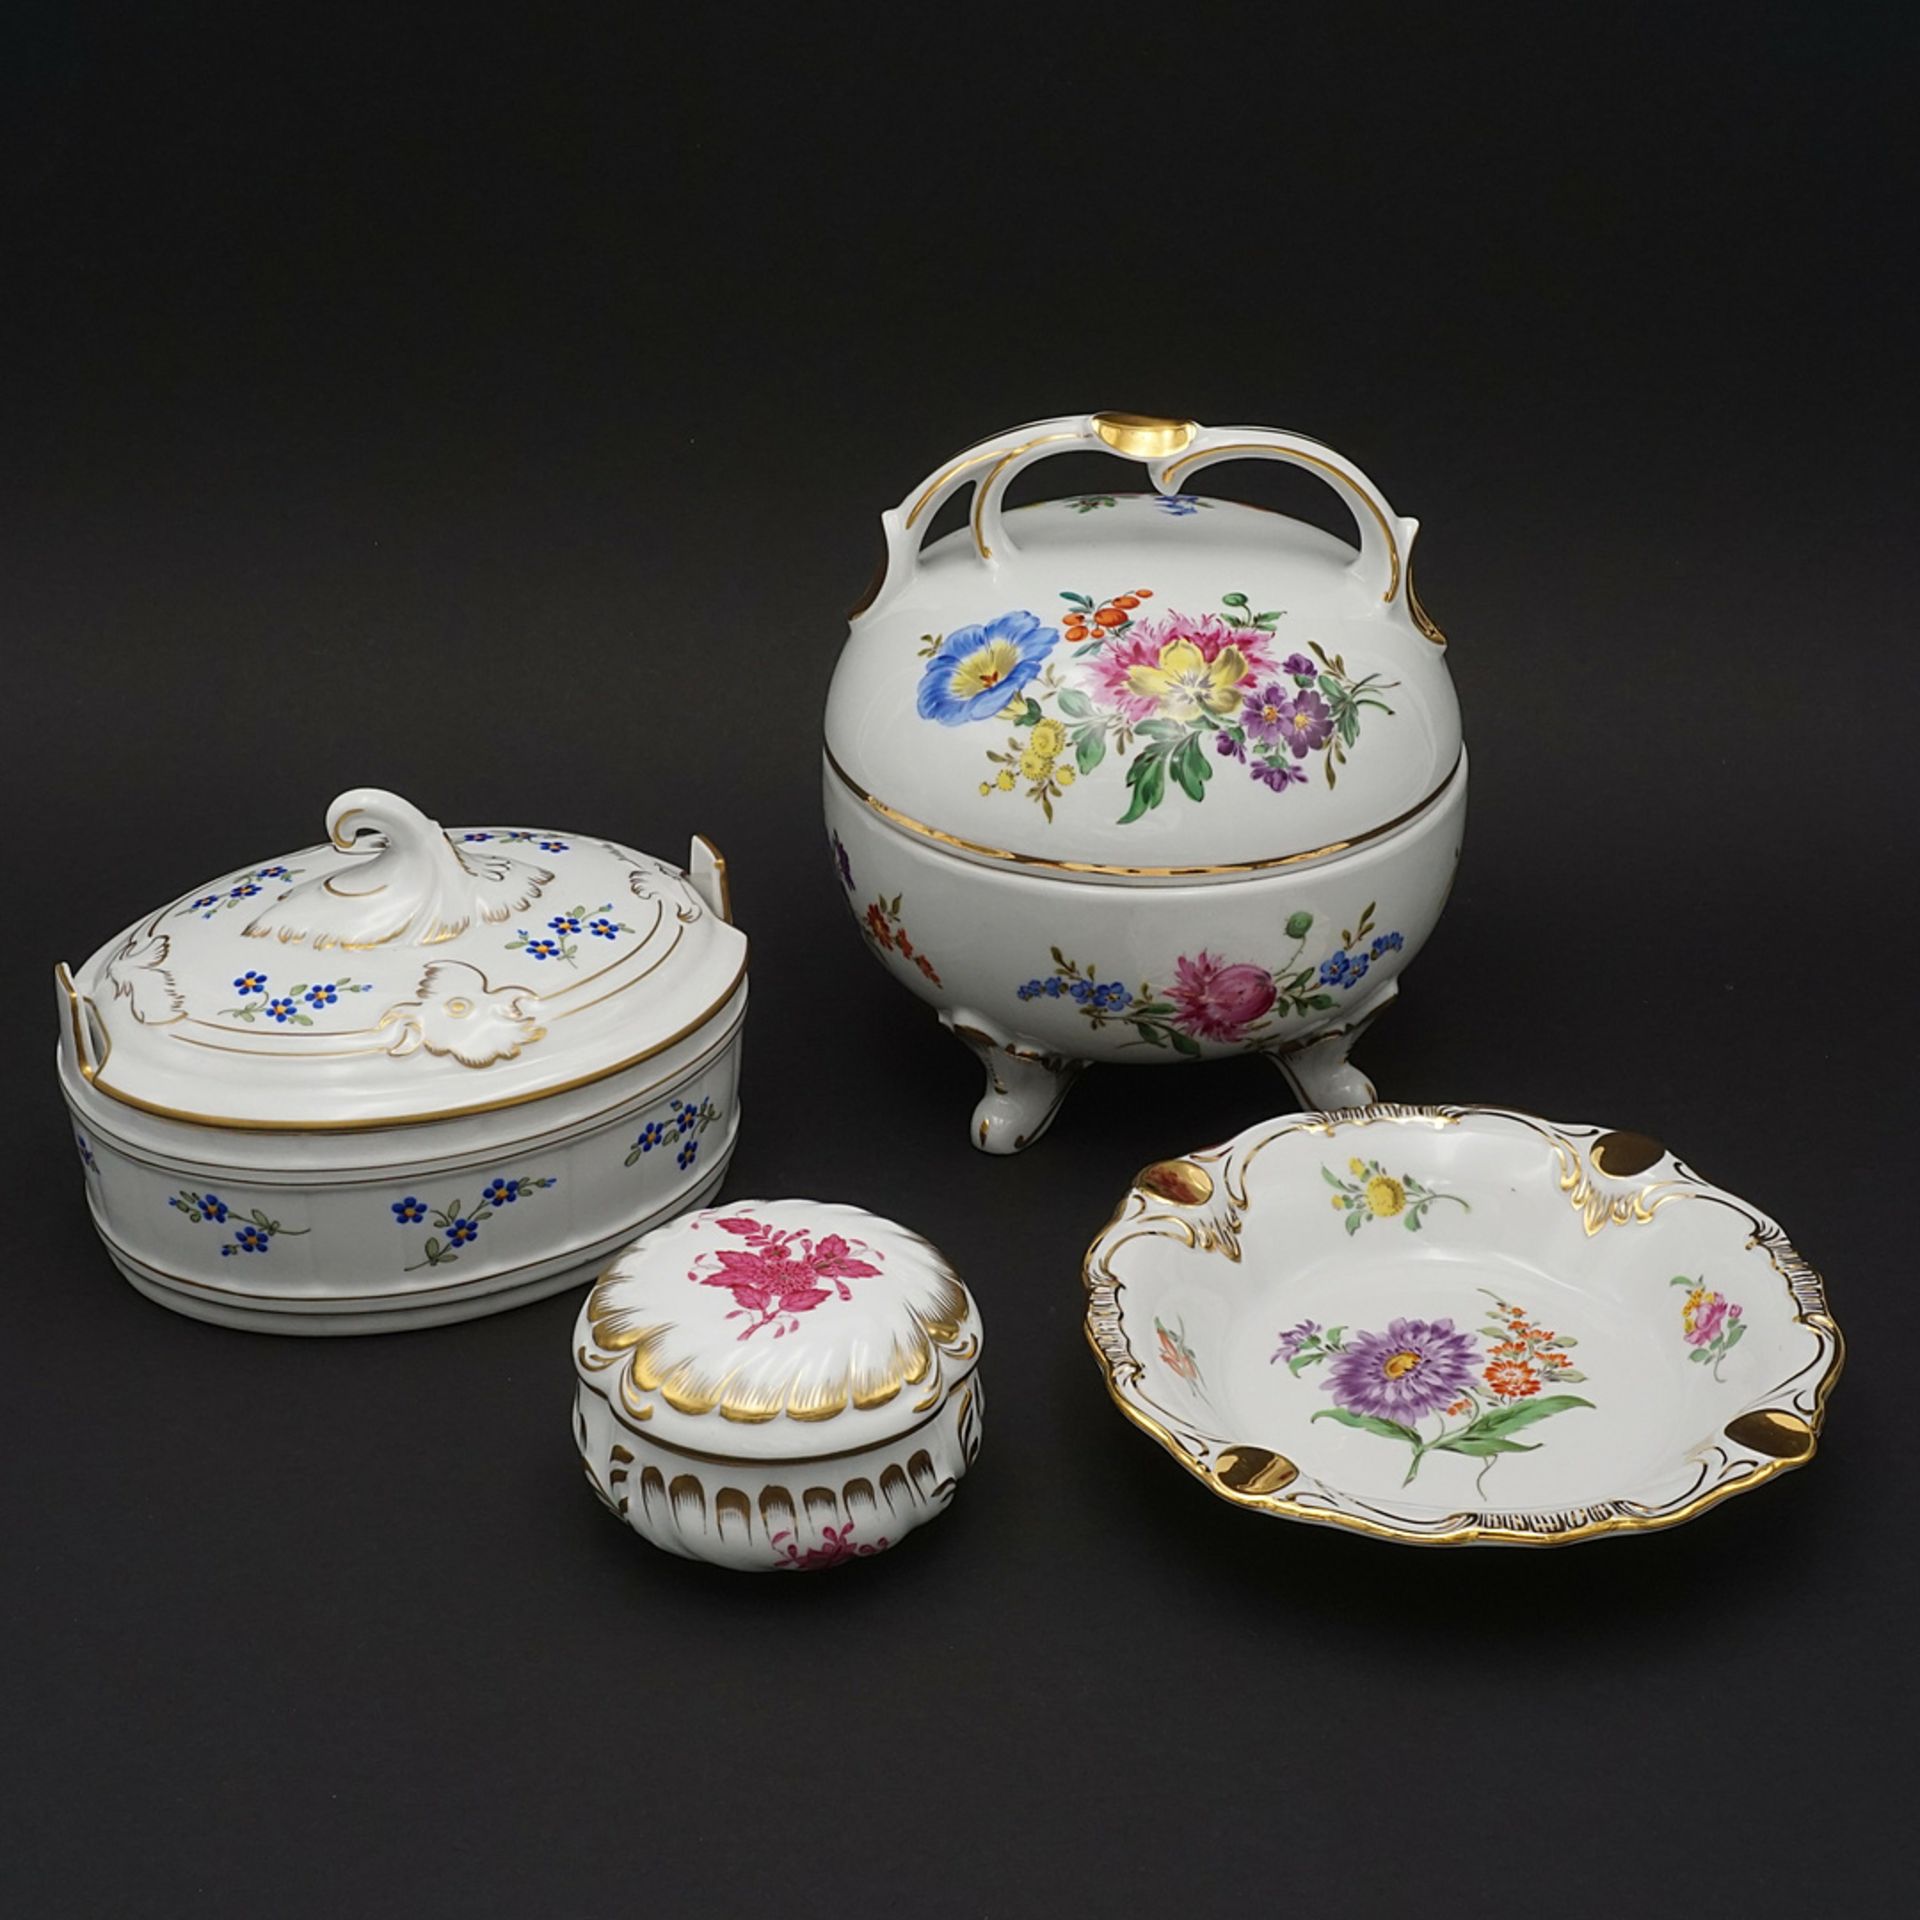 Three lidded boxes and an ashtray with flower painting